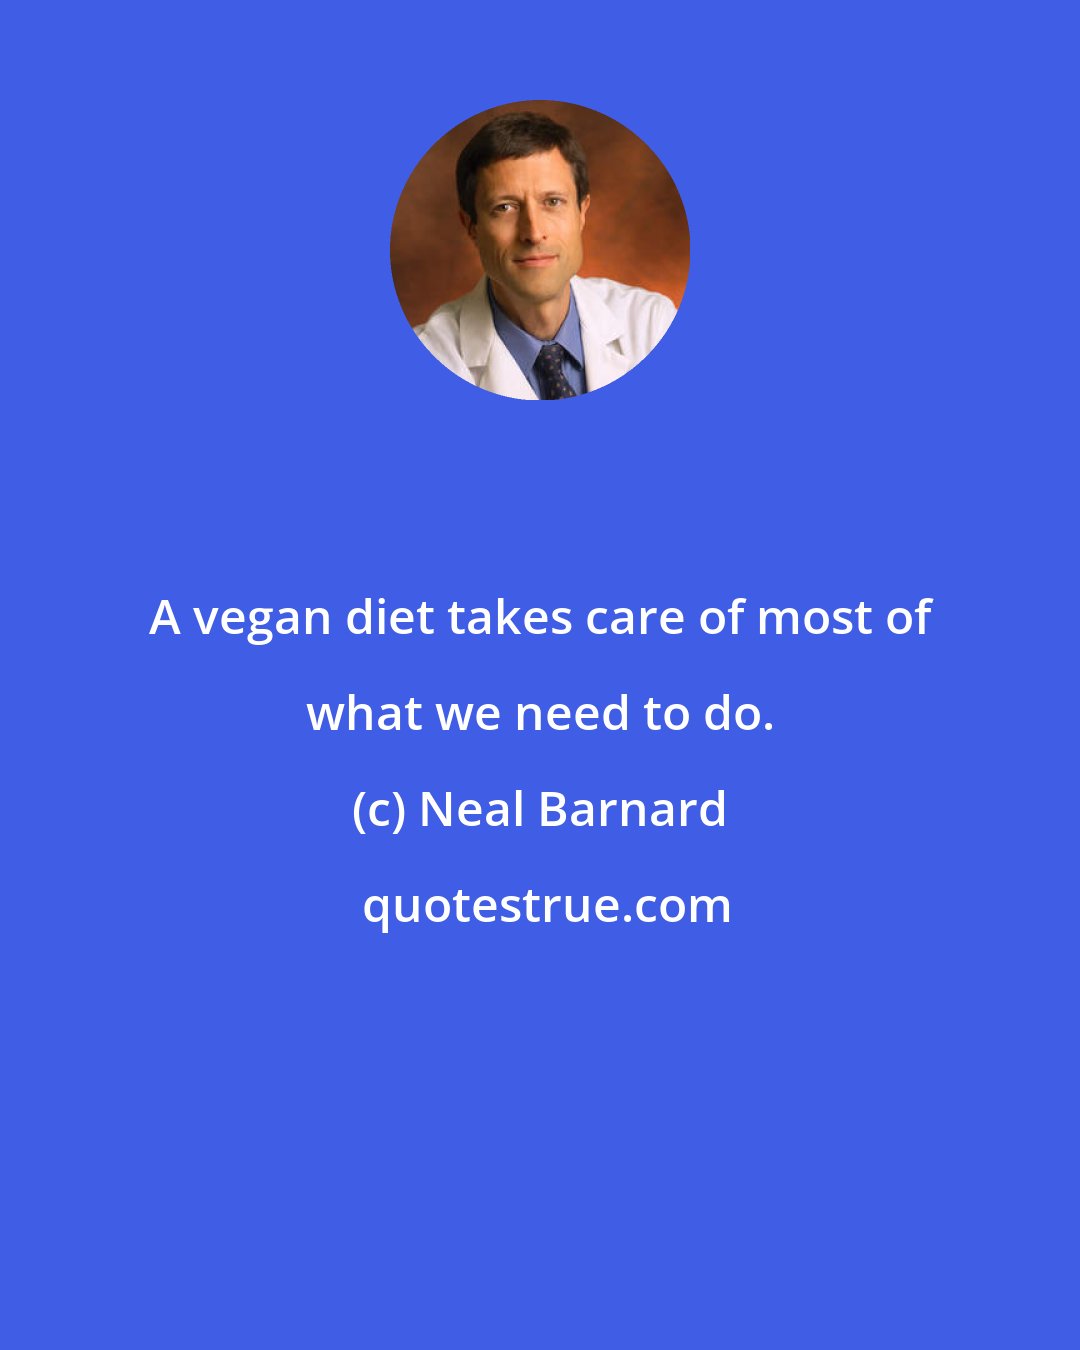 Neal Barnard: A vegan diet takes care of most of what we need to do.